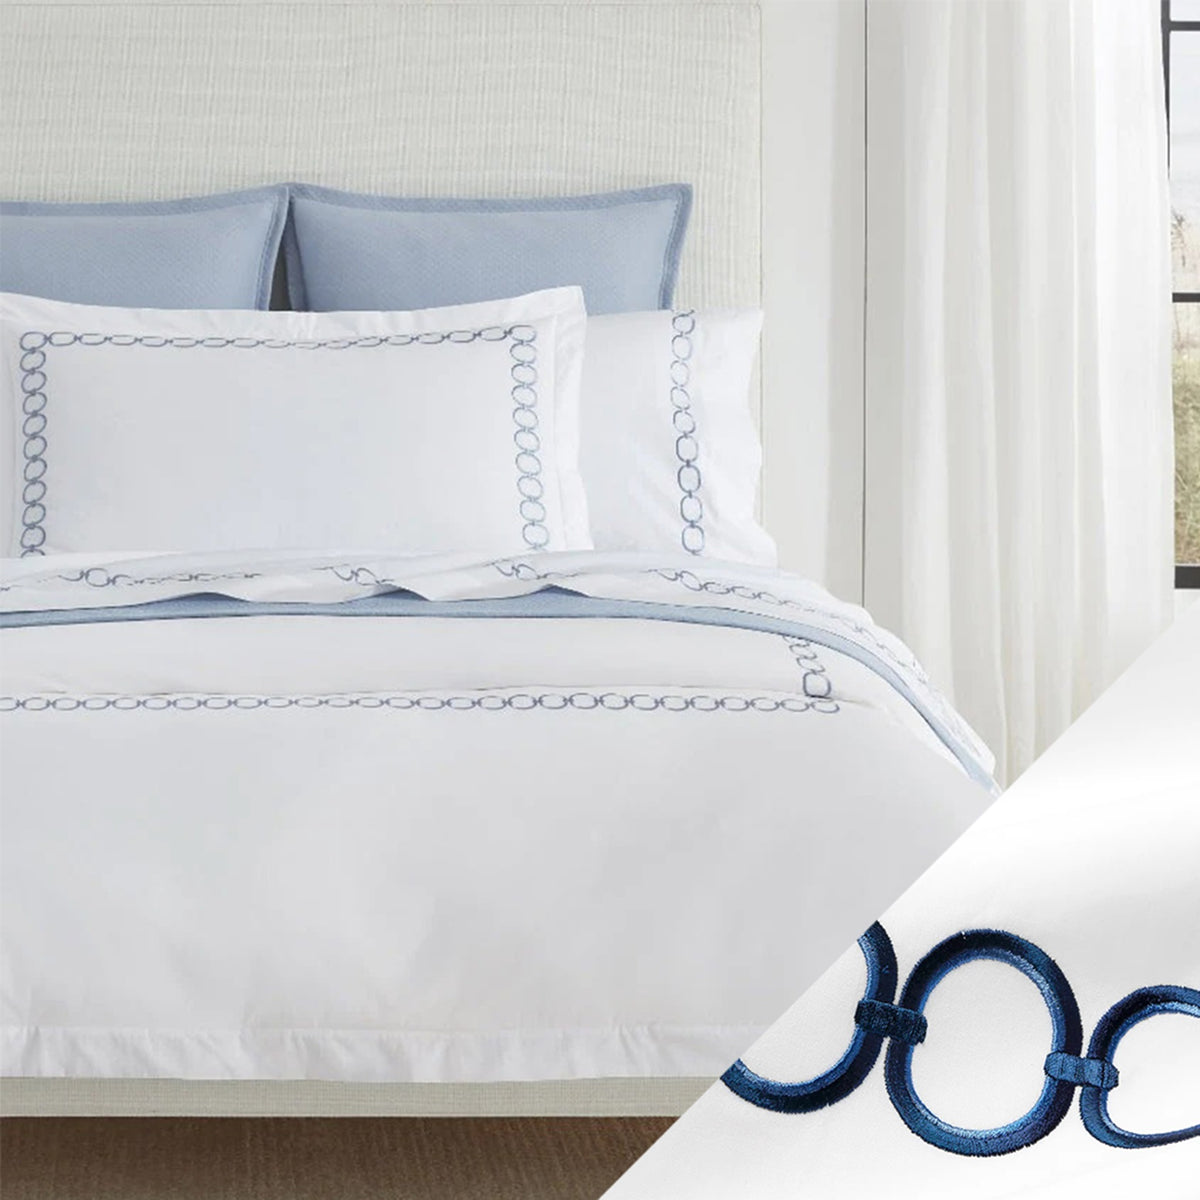 Bed Dressed in Sferra Catena Bedding with Swatch in White/Navy Color